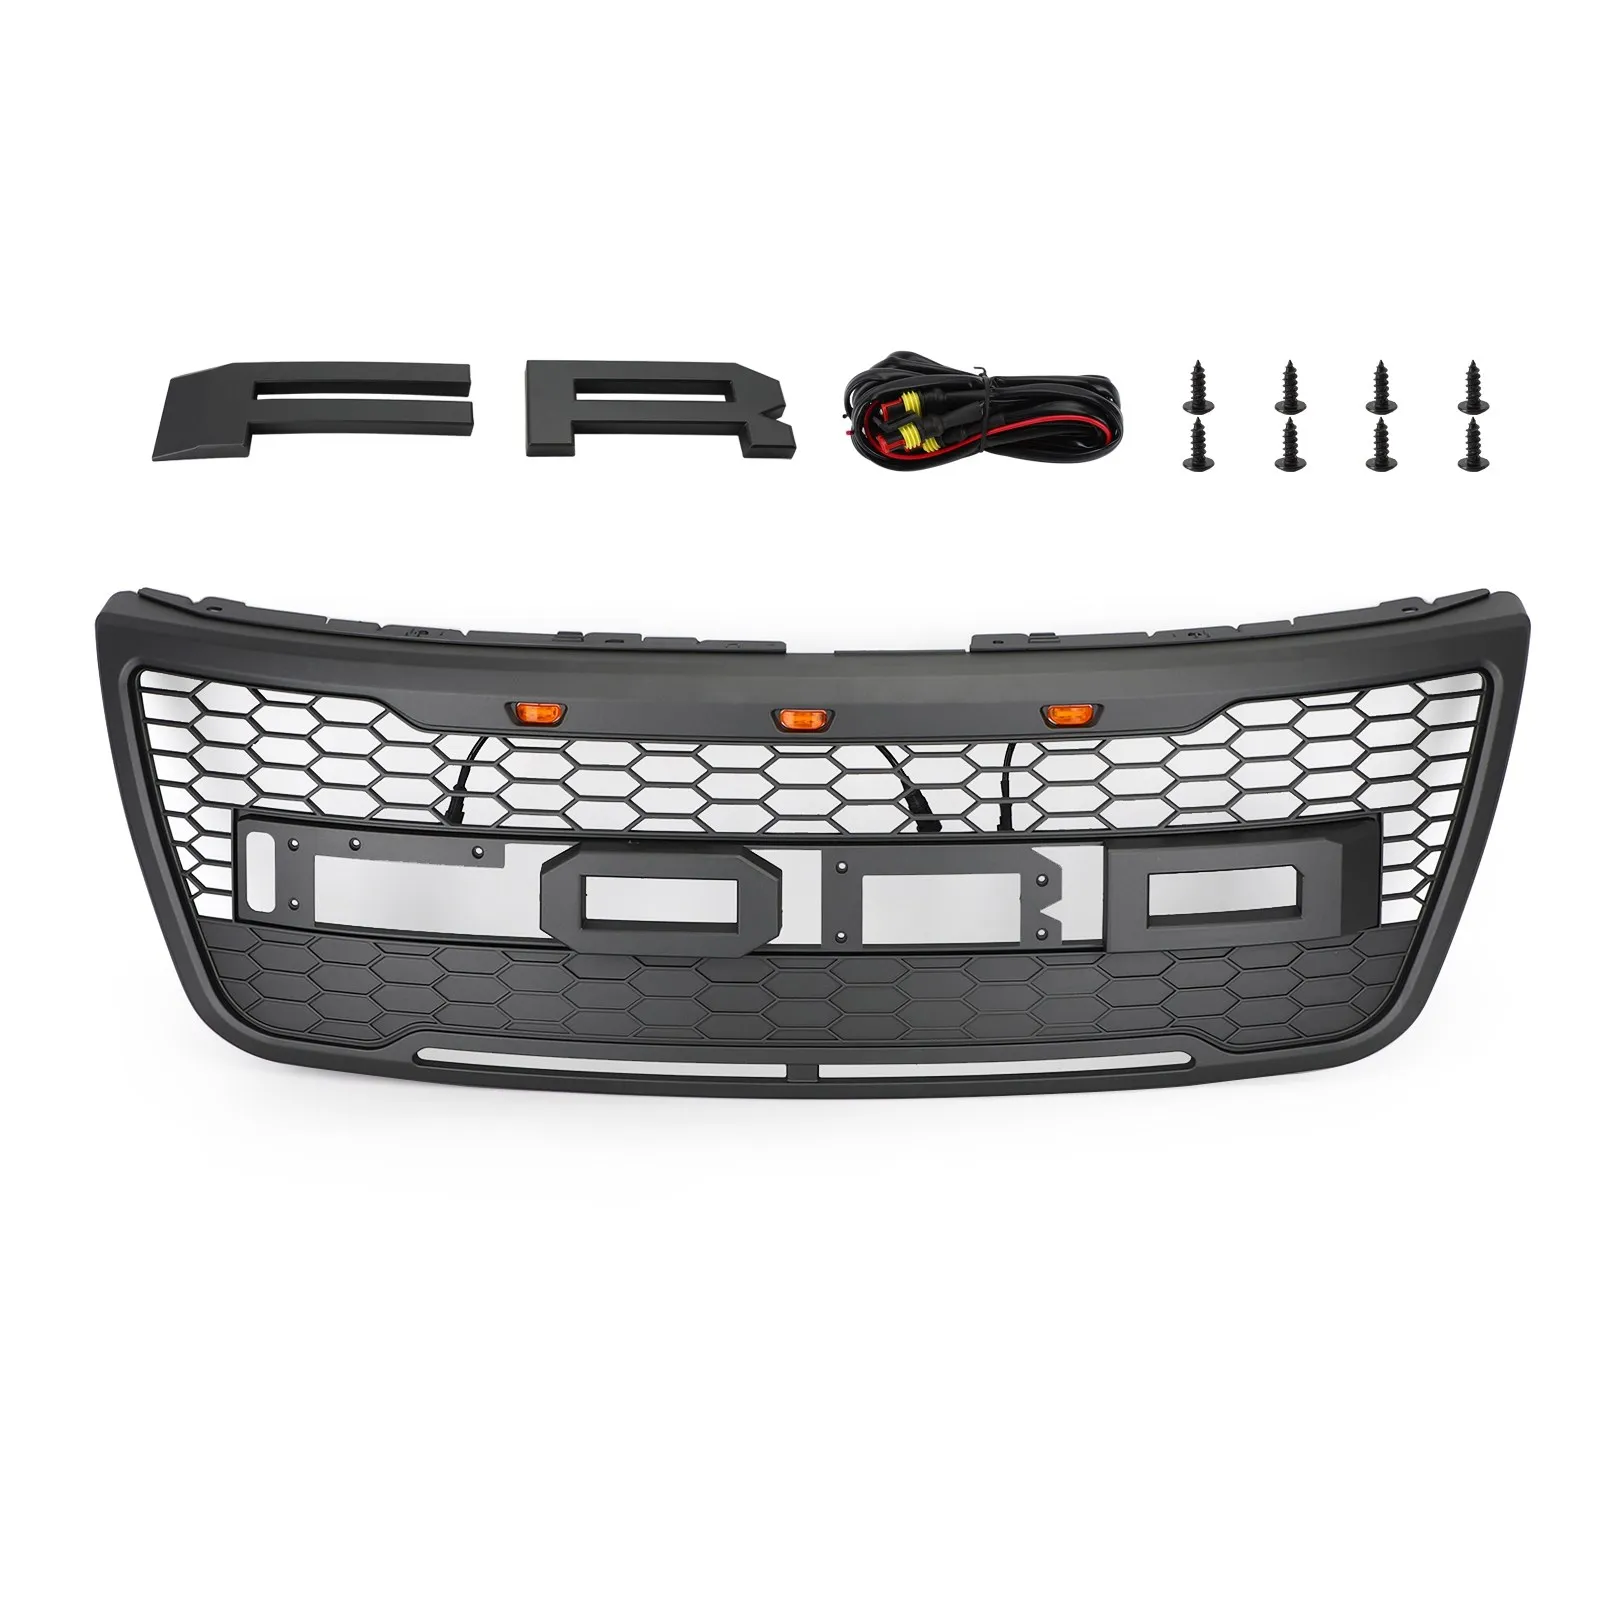 

Grey Black Front Upper Bumper Grille Grill For Ford Explorer 2012 2013 2014 2015 With Lights and Letters